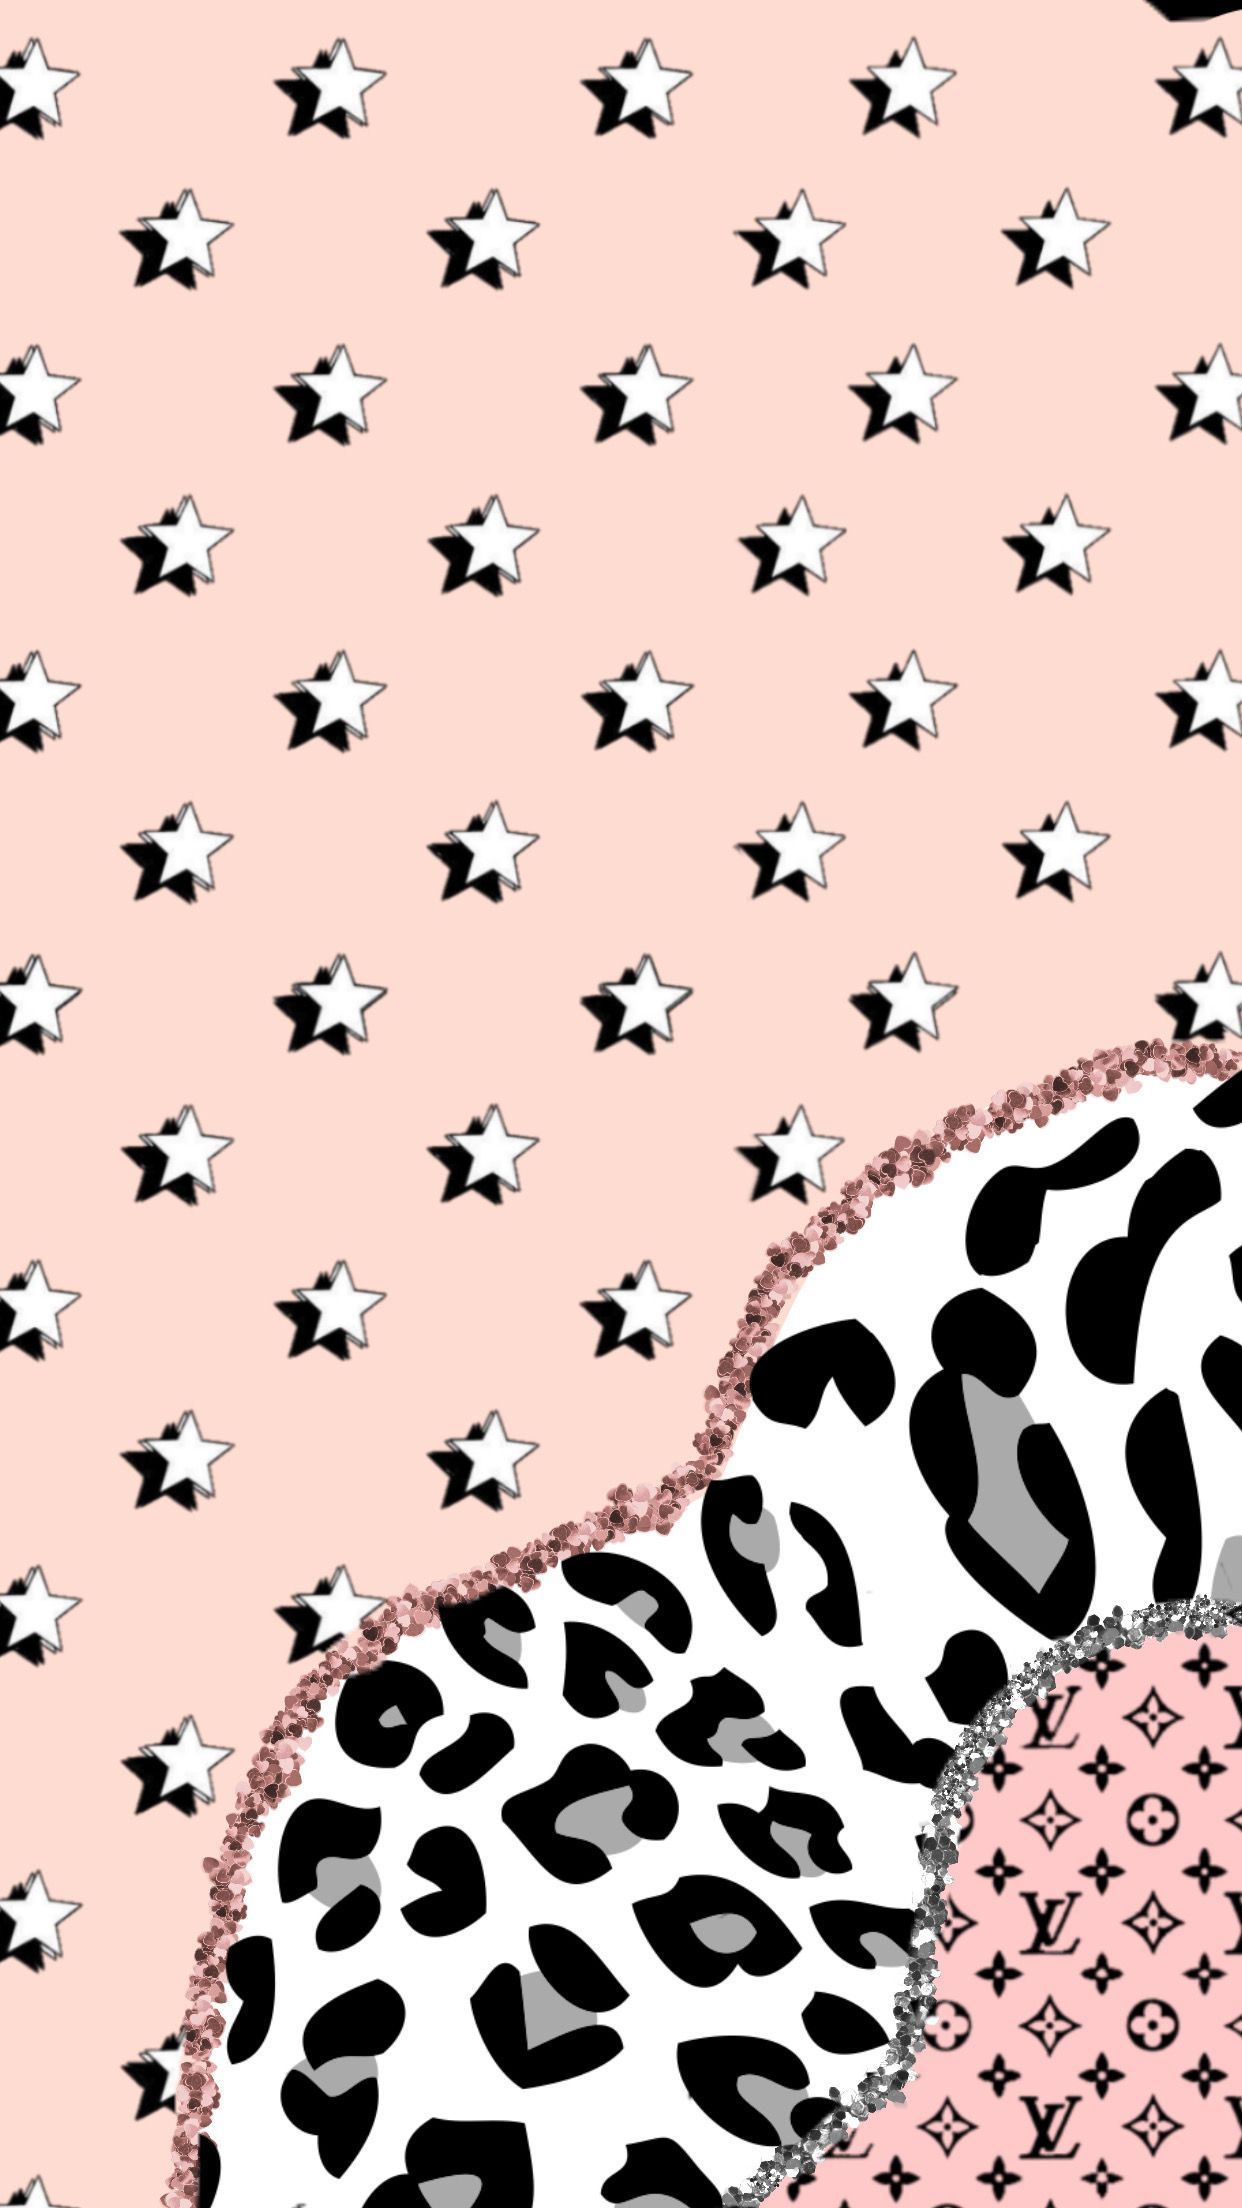 A pink and black pattern with white stars - Preppy